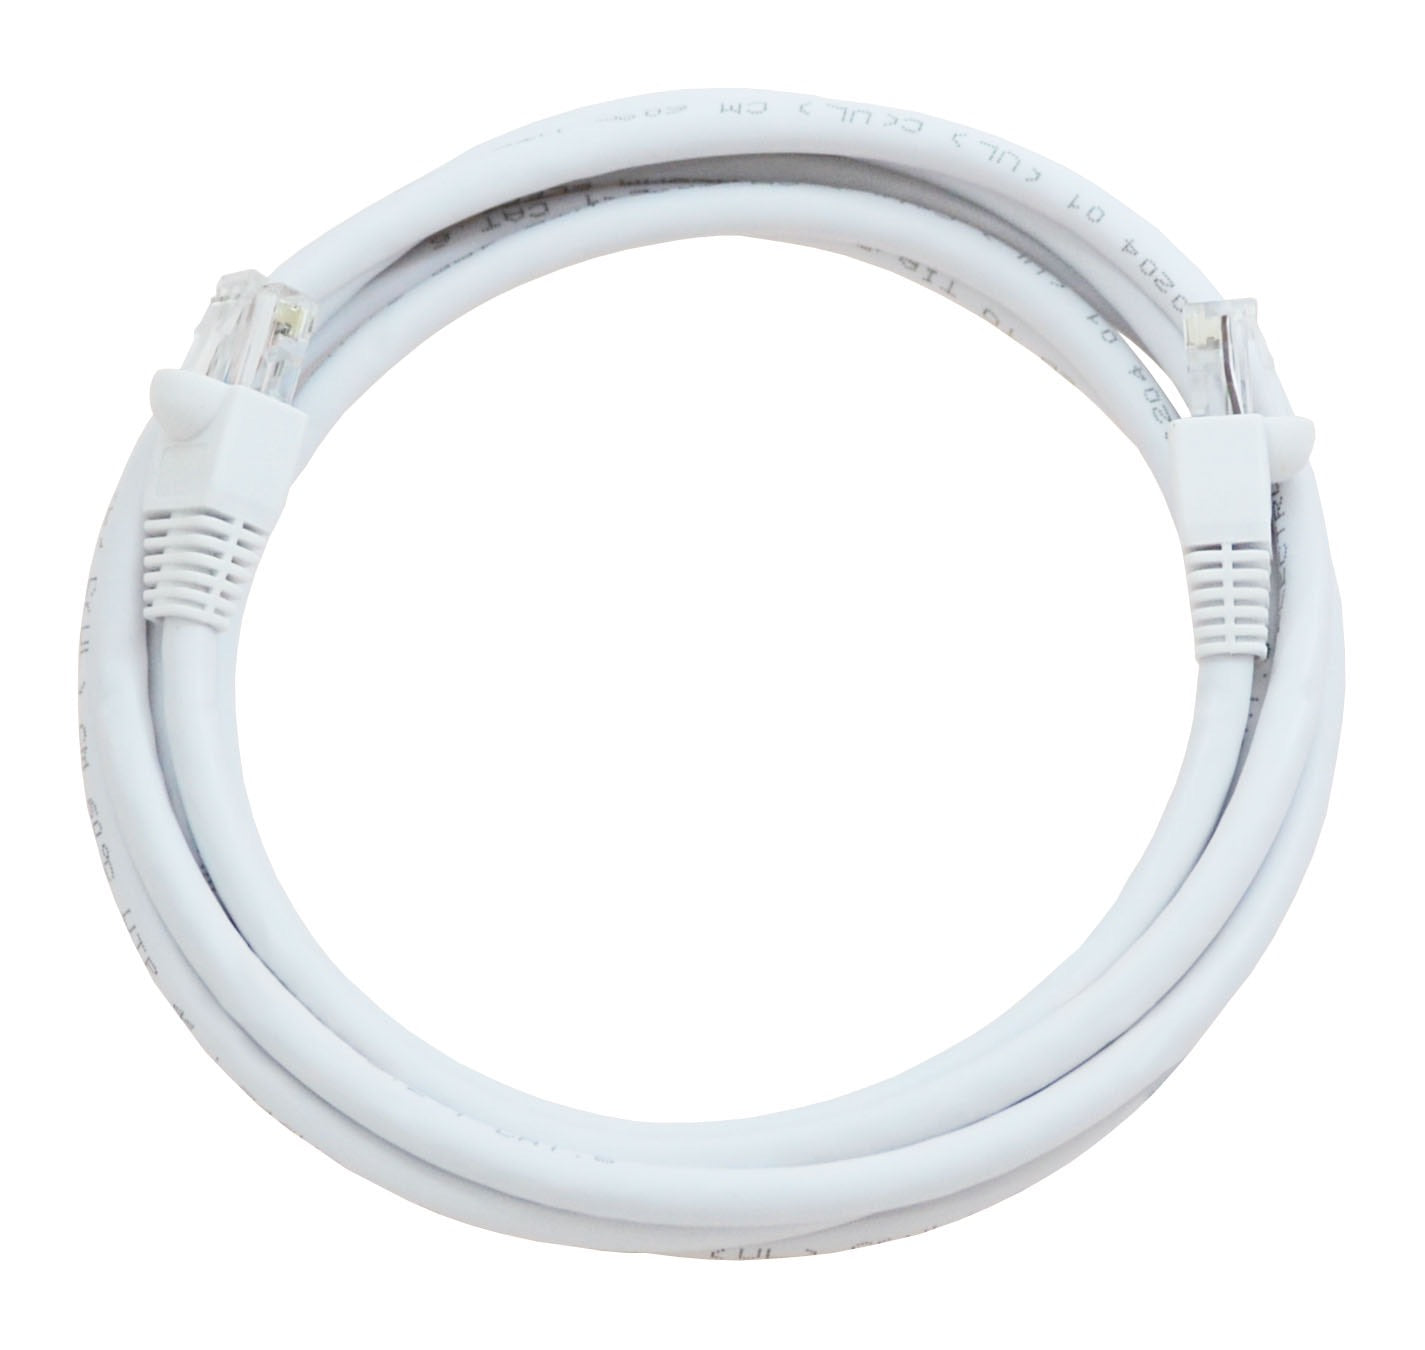 CATEGORY 6 PATCH CABLES, 3ft, White